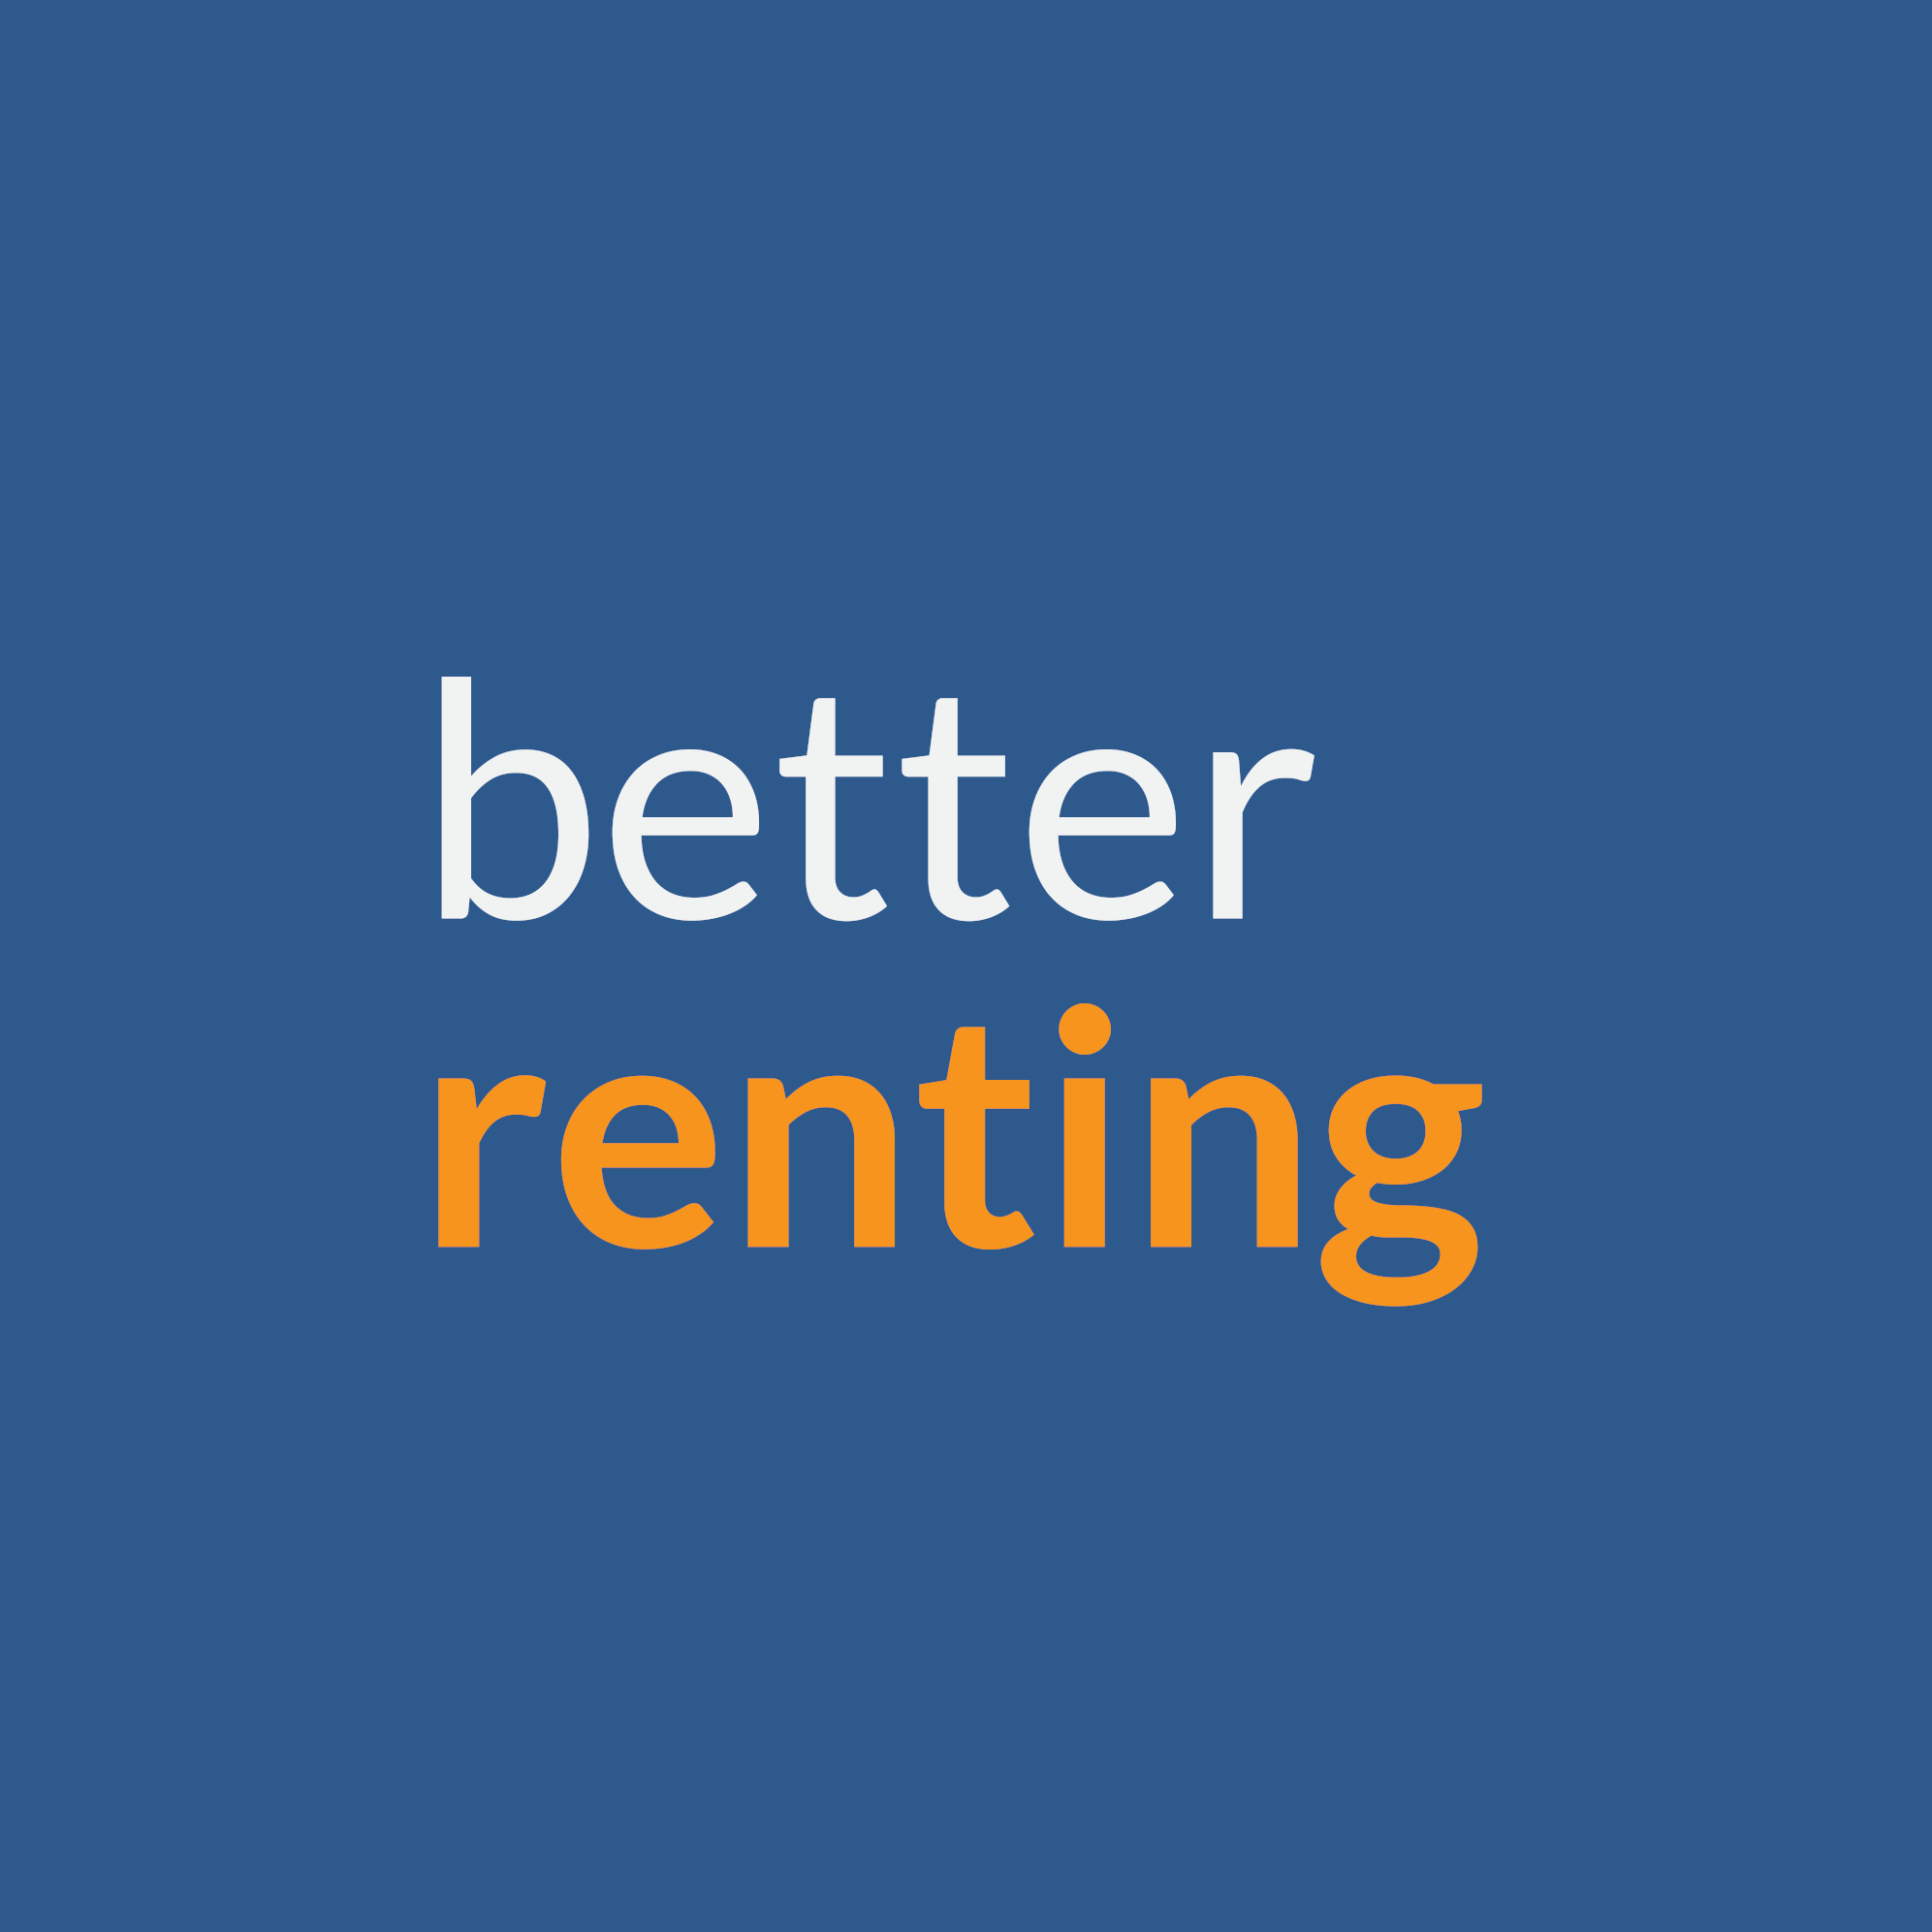 Profile of Better Renting